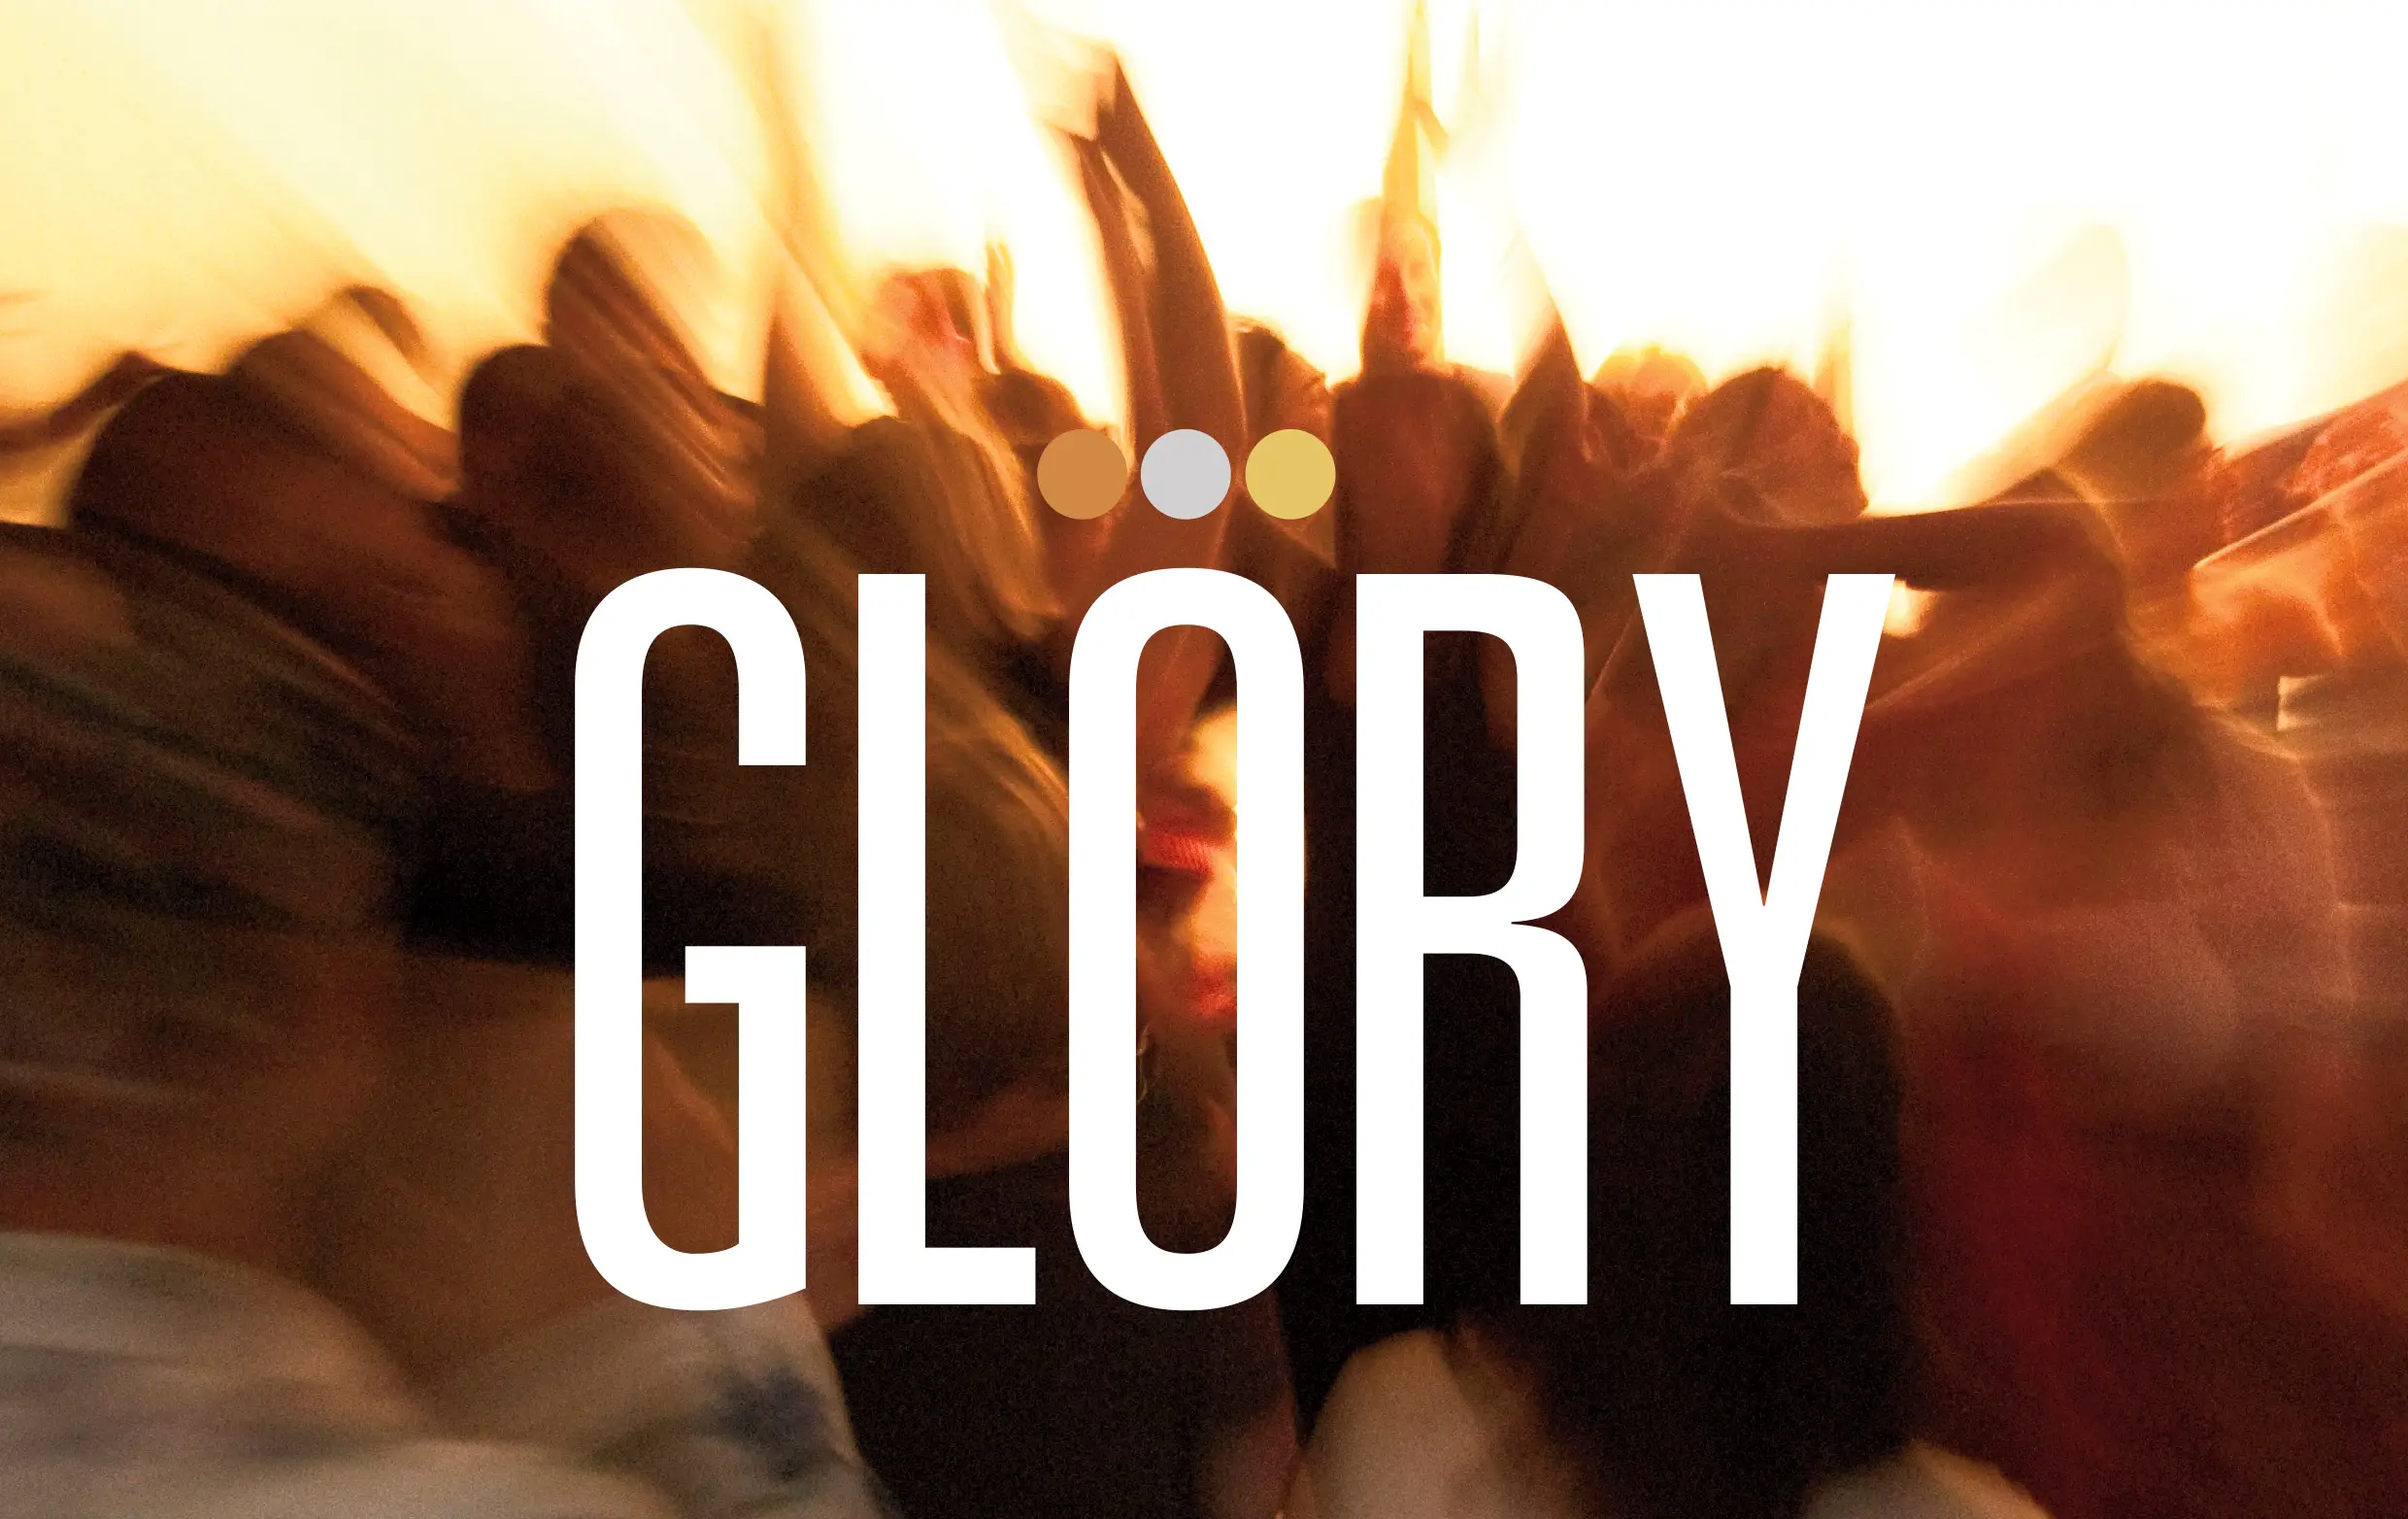 Read more about the article Jesus’ Pre-existing Glory:  An Examination of John 17:5